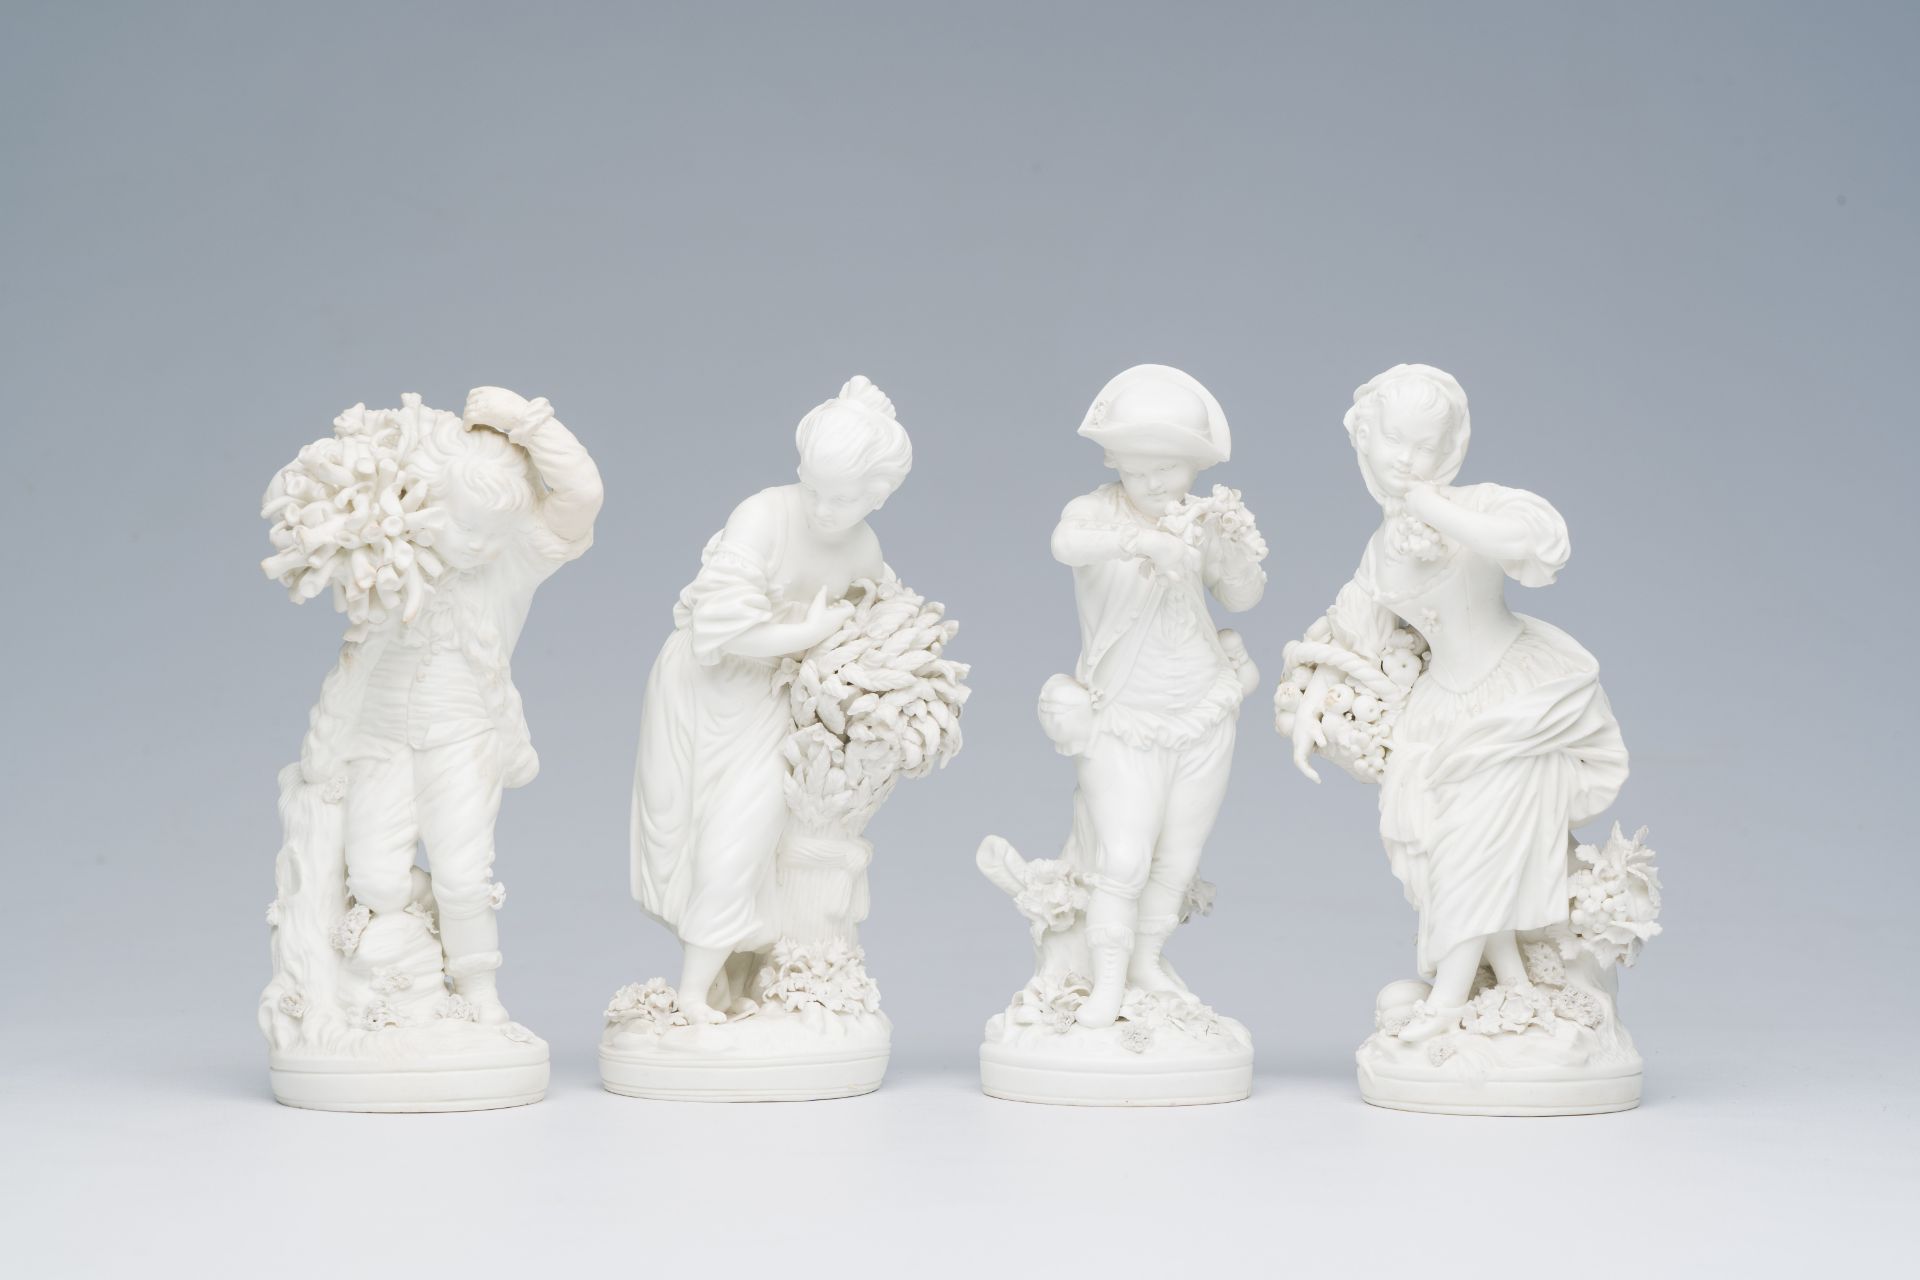 Four fine English biscuit figures depicting the 'four seasons', 19th C.